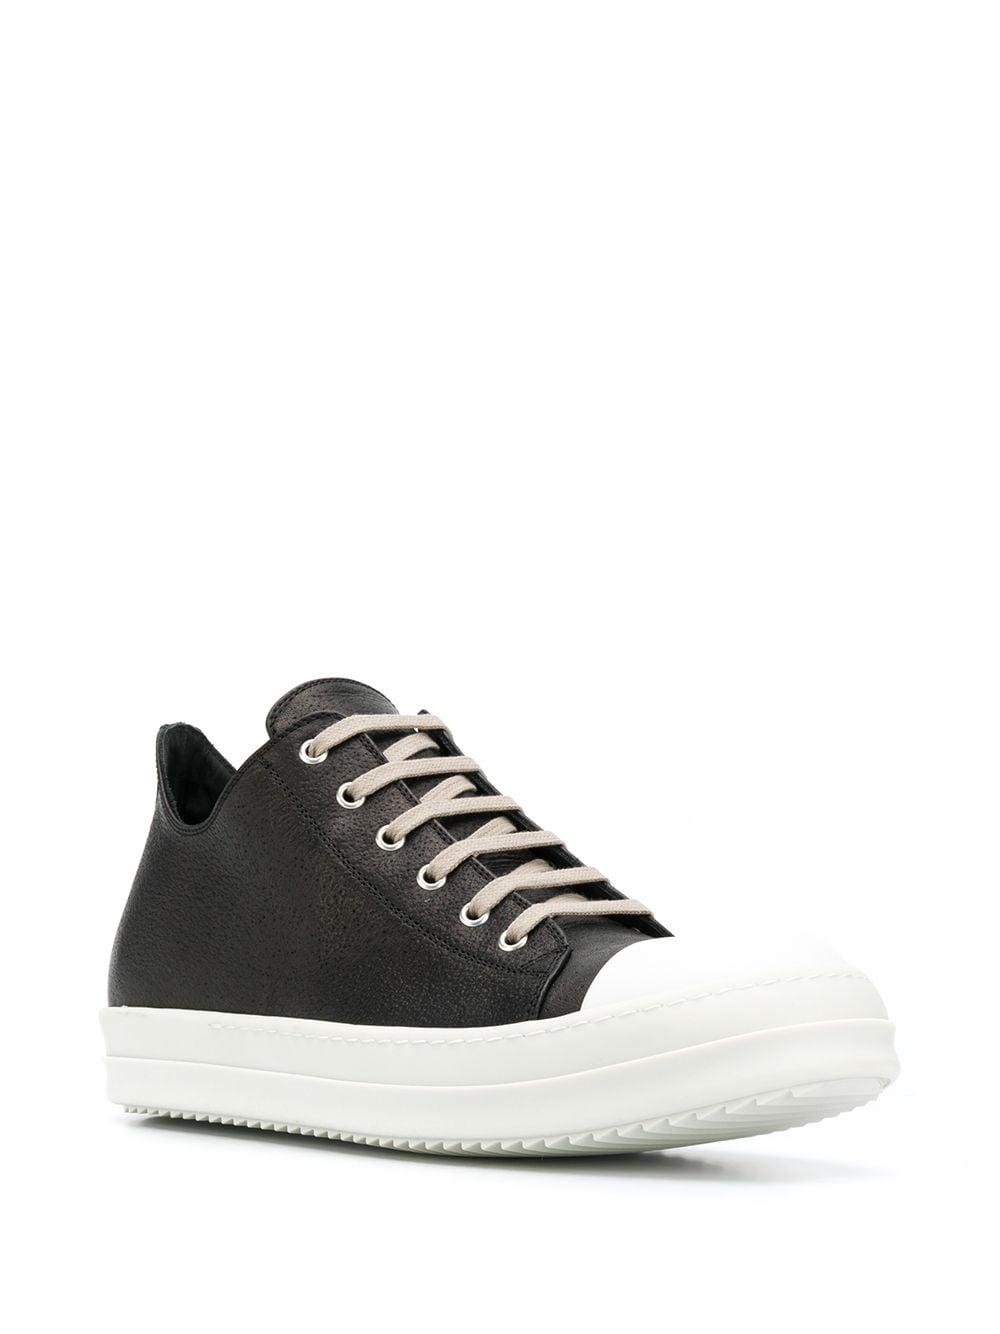 Rick Owens Leather Lace-up Low-top Sneakers in Black for Men - Lyst